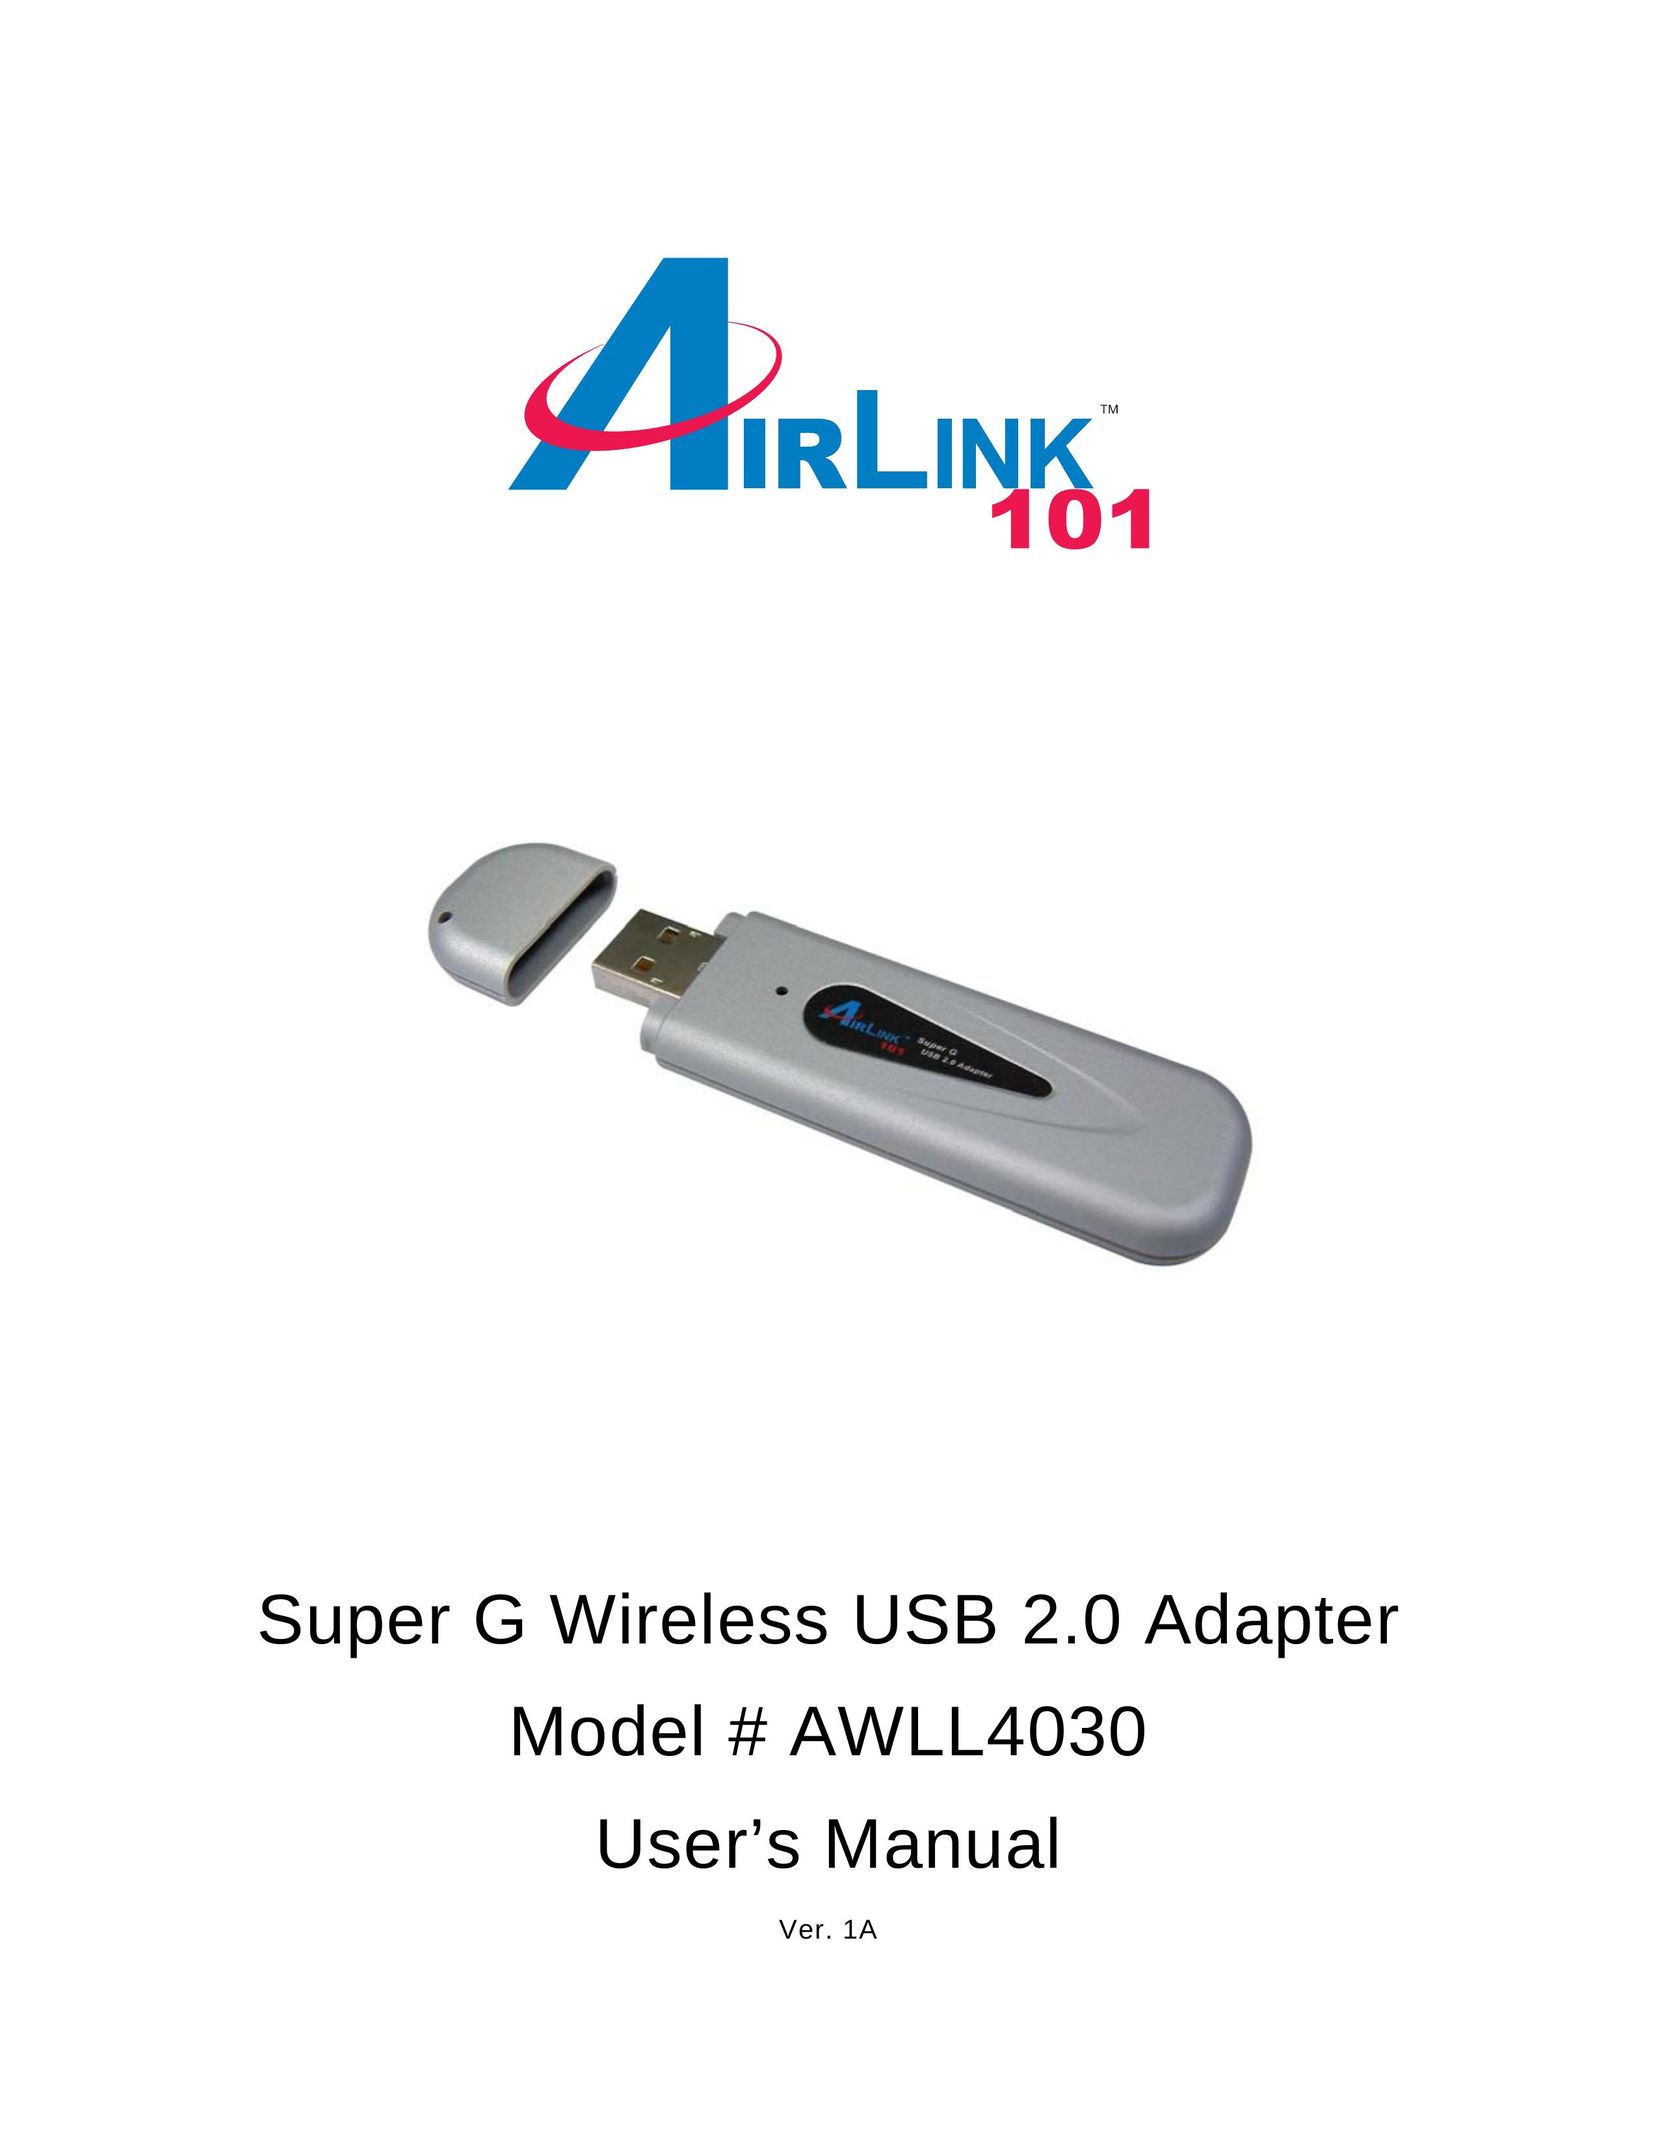 Airlink101 AWLL4030 Network Card User Manual